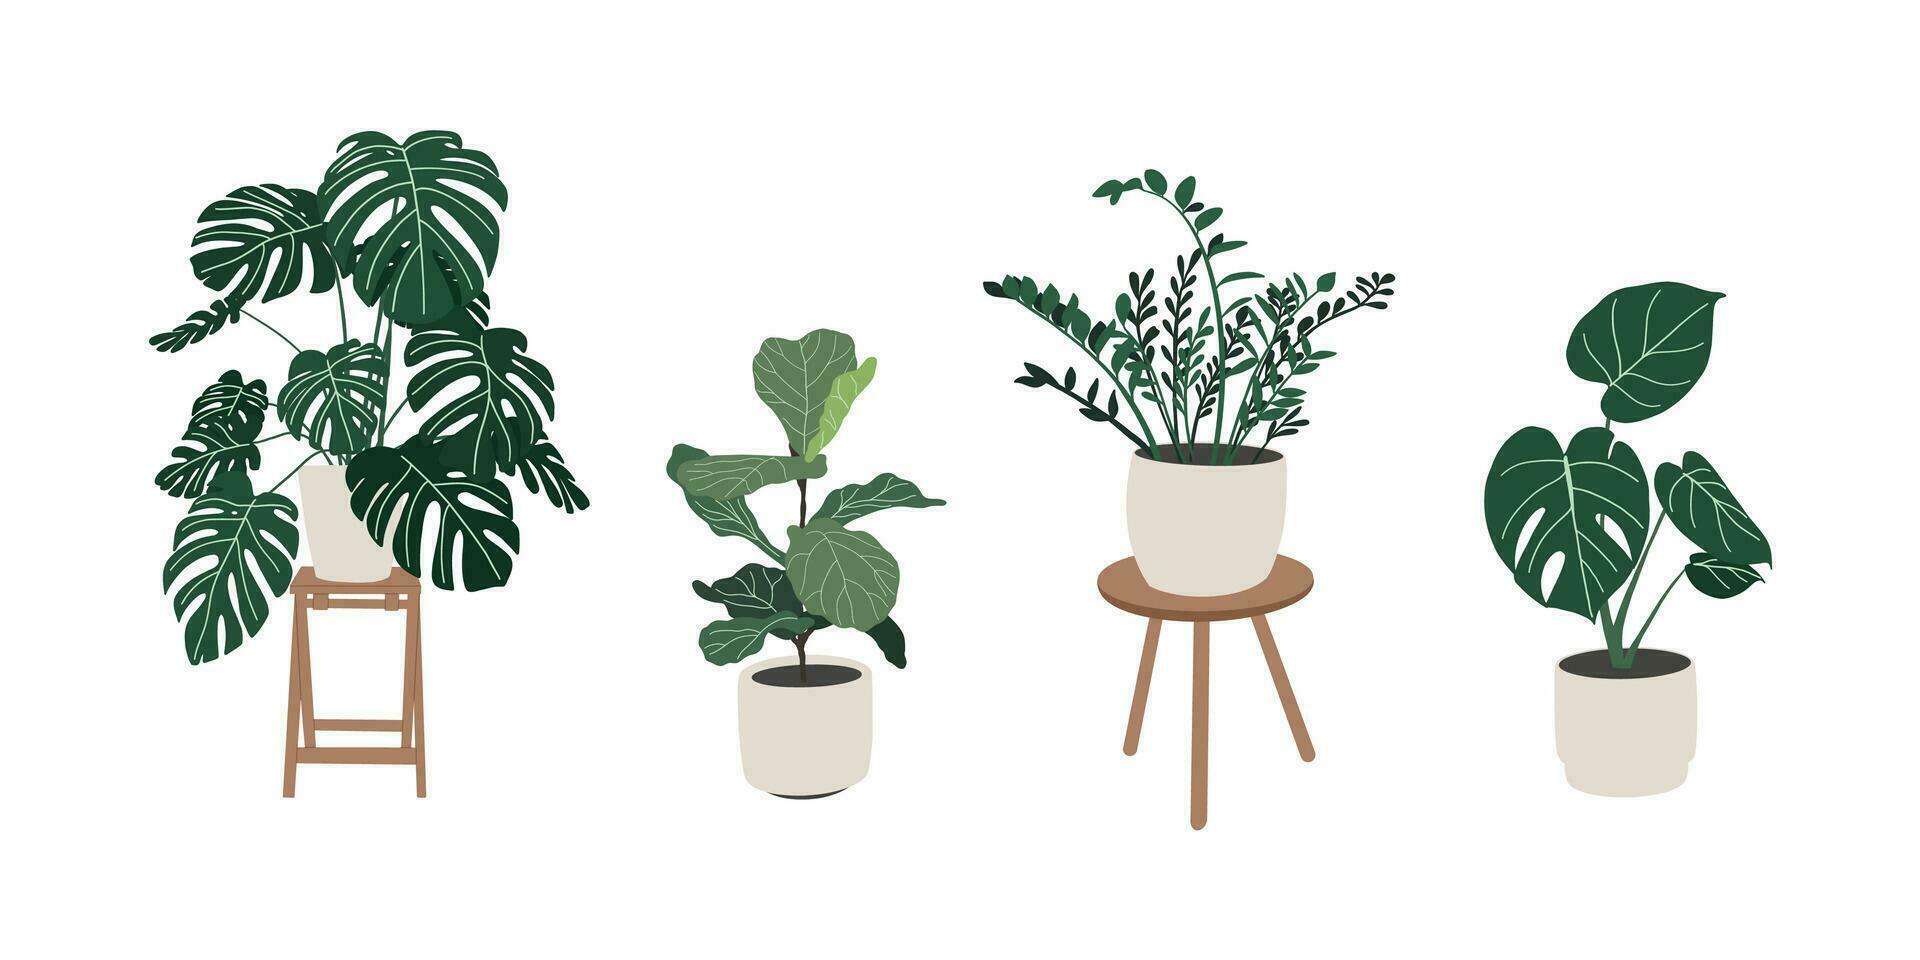 House plants set. Trendy home decor with plants, tropical leaves in stylish planters and pots. Home garden. Scandinavian cozy home decor. Hand drawn vector design